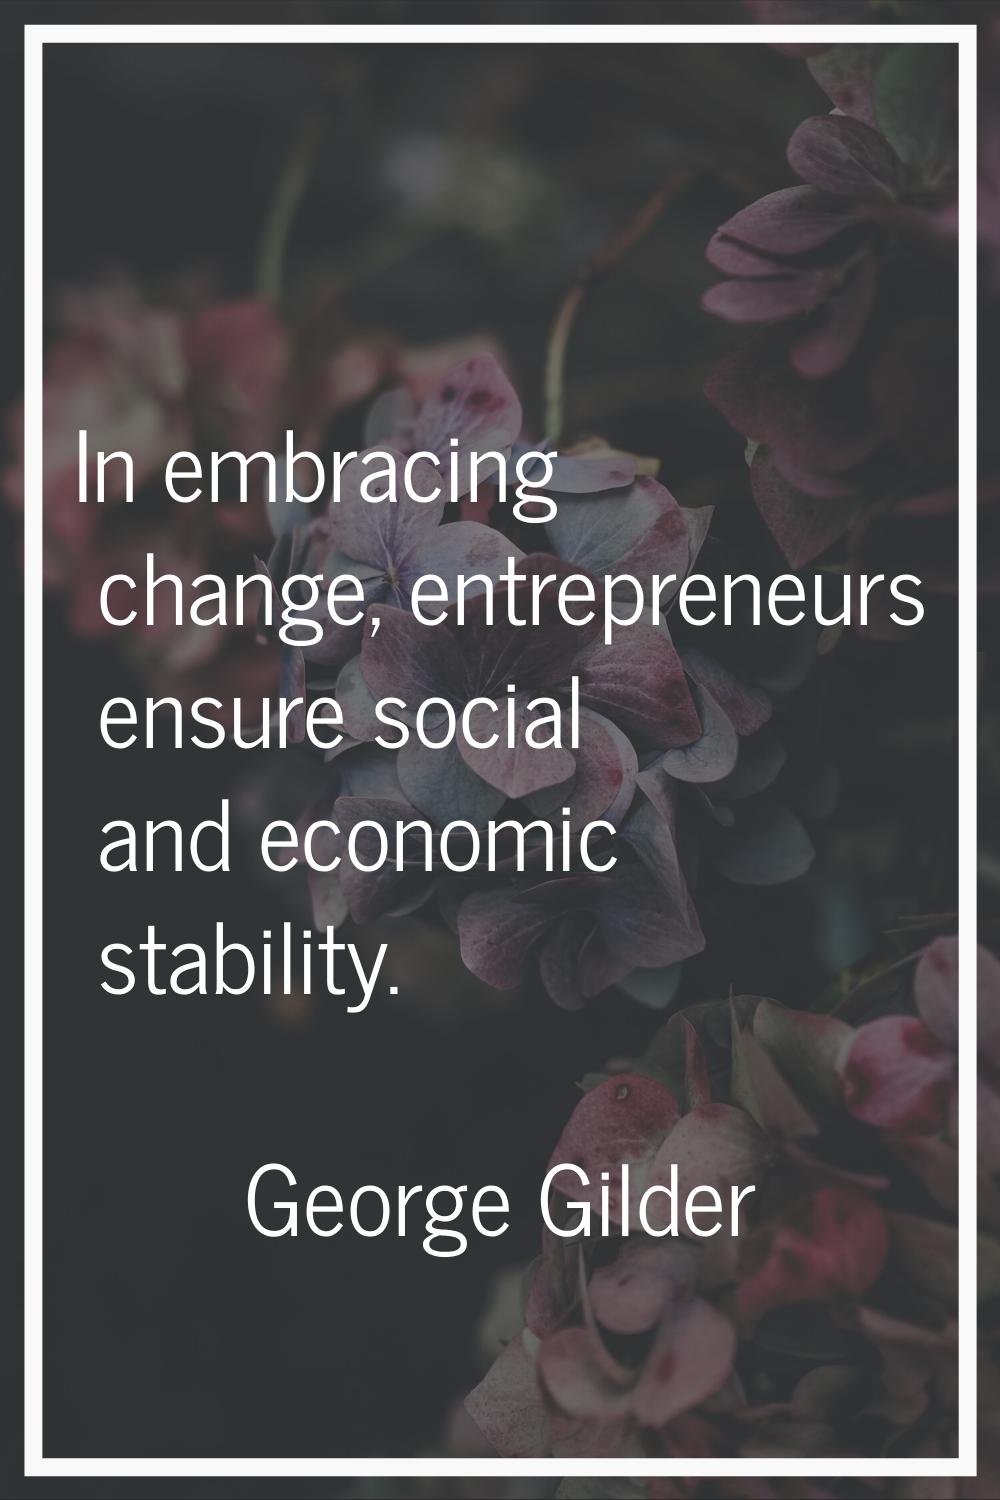 In embracing change, entrepreneurs ensure social and economic stability.